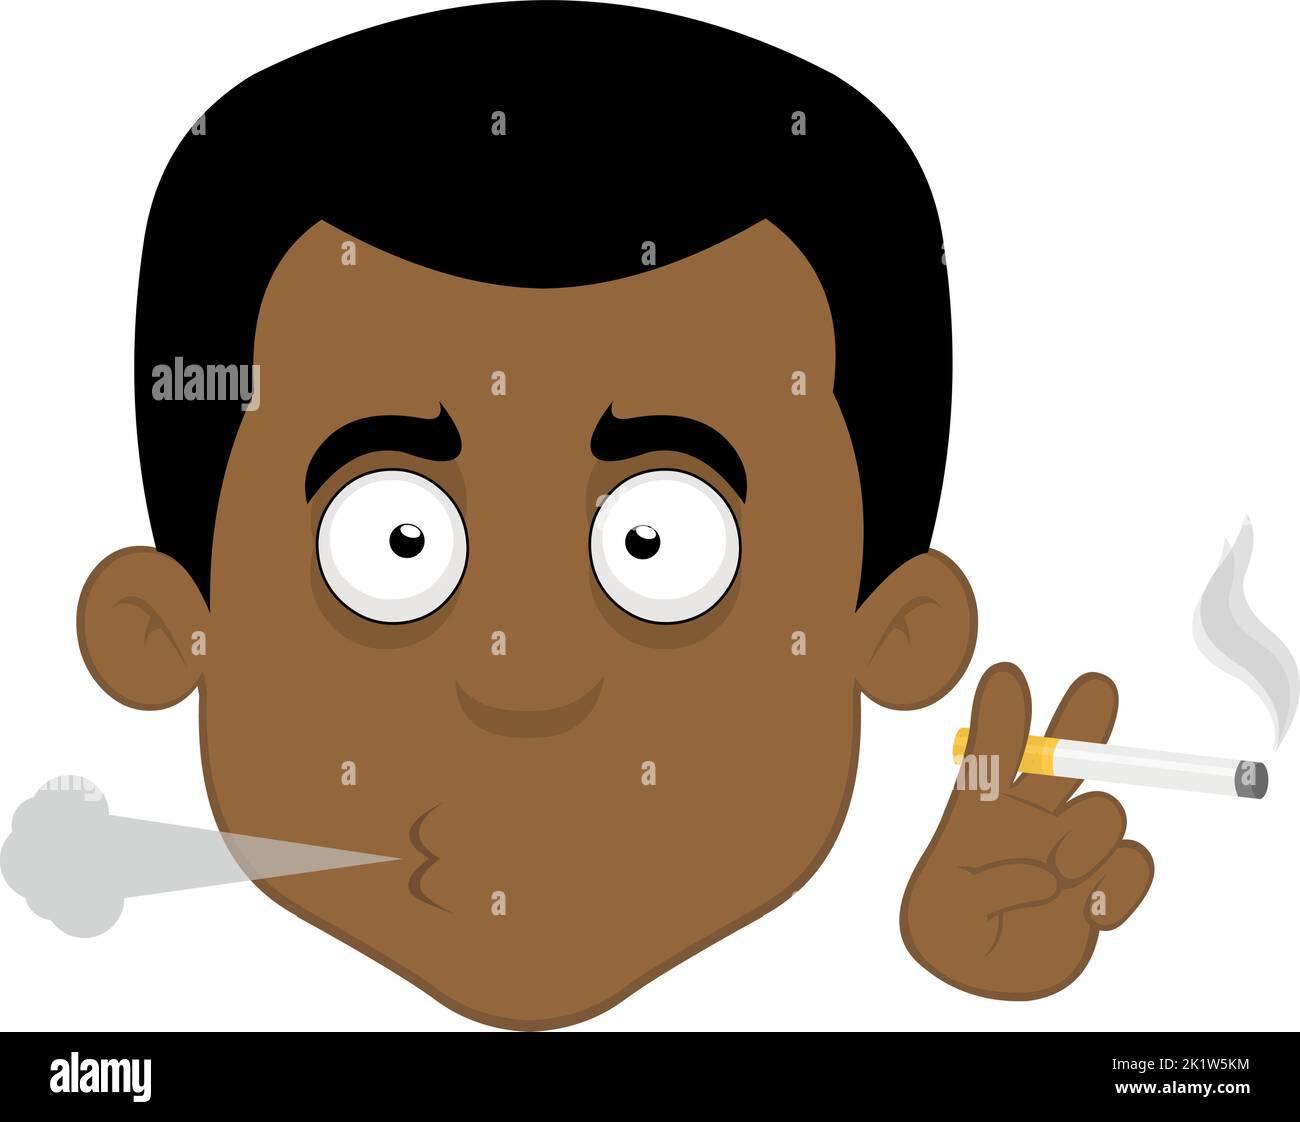 Vector illustration of the face of a cartoon man smoking with a cigarette in his hand Stock Vector